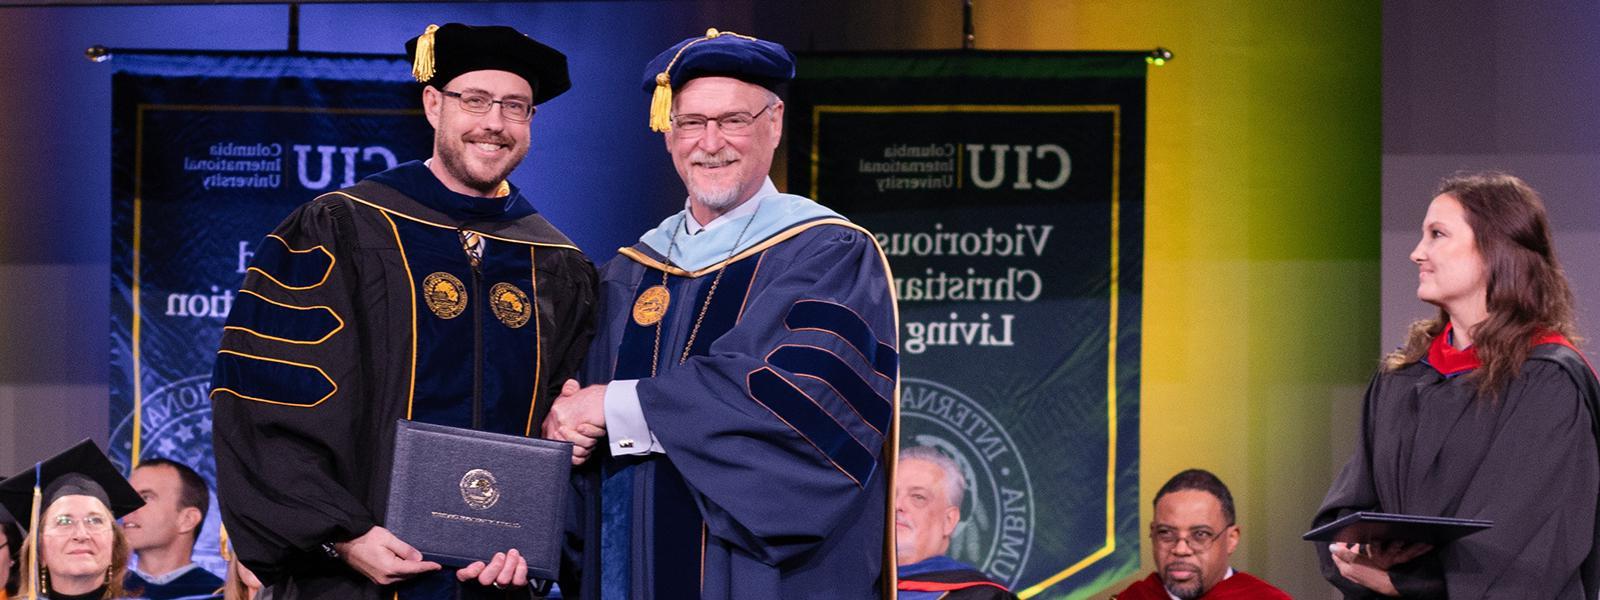 Doug Smith receives his doctorate from CIU Executive Vice President Dr. Rick Christman.